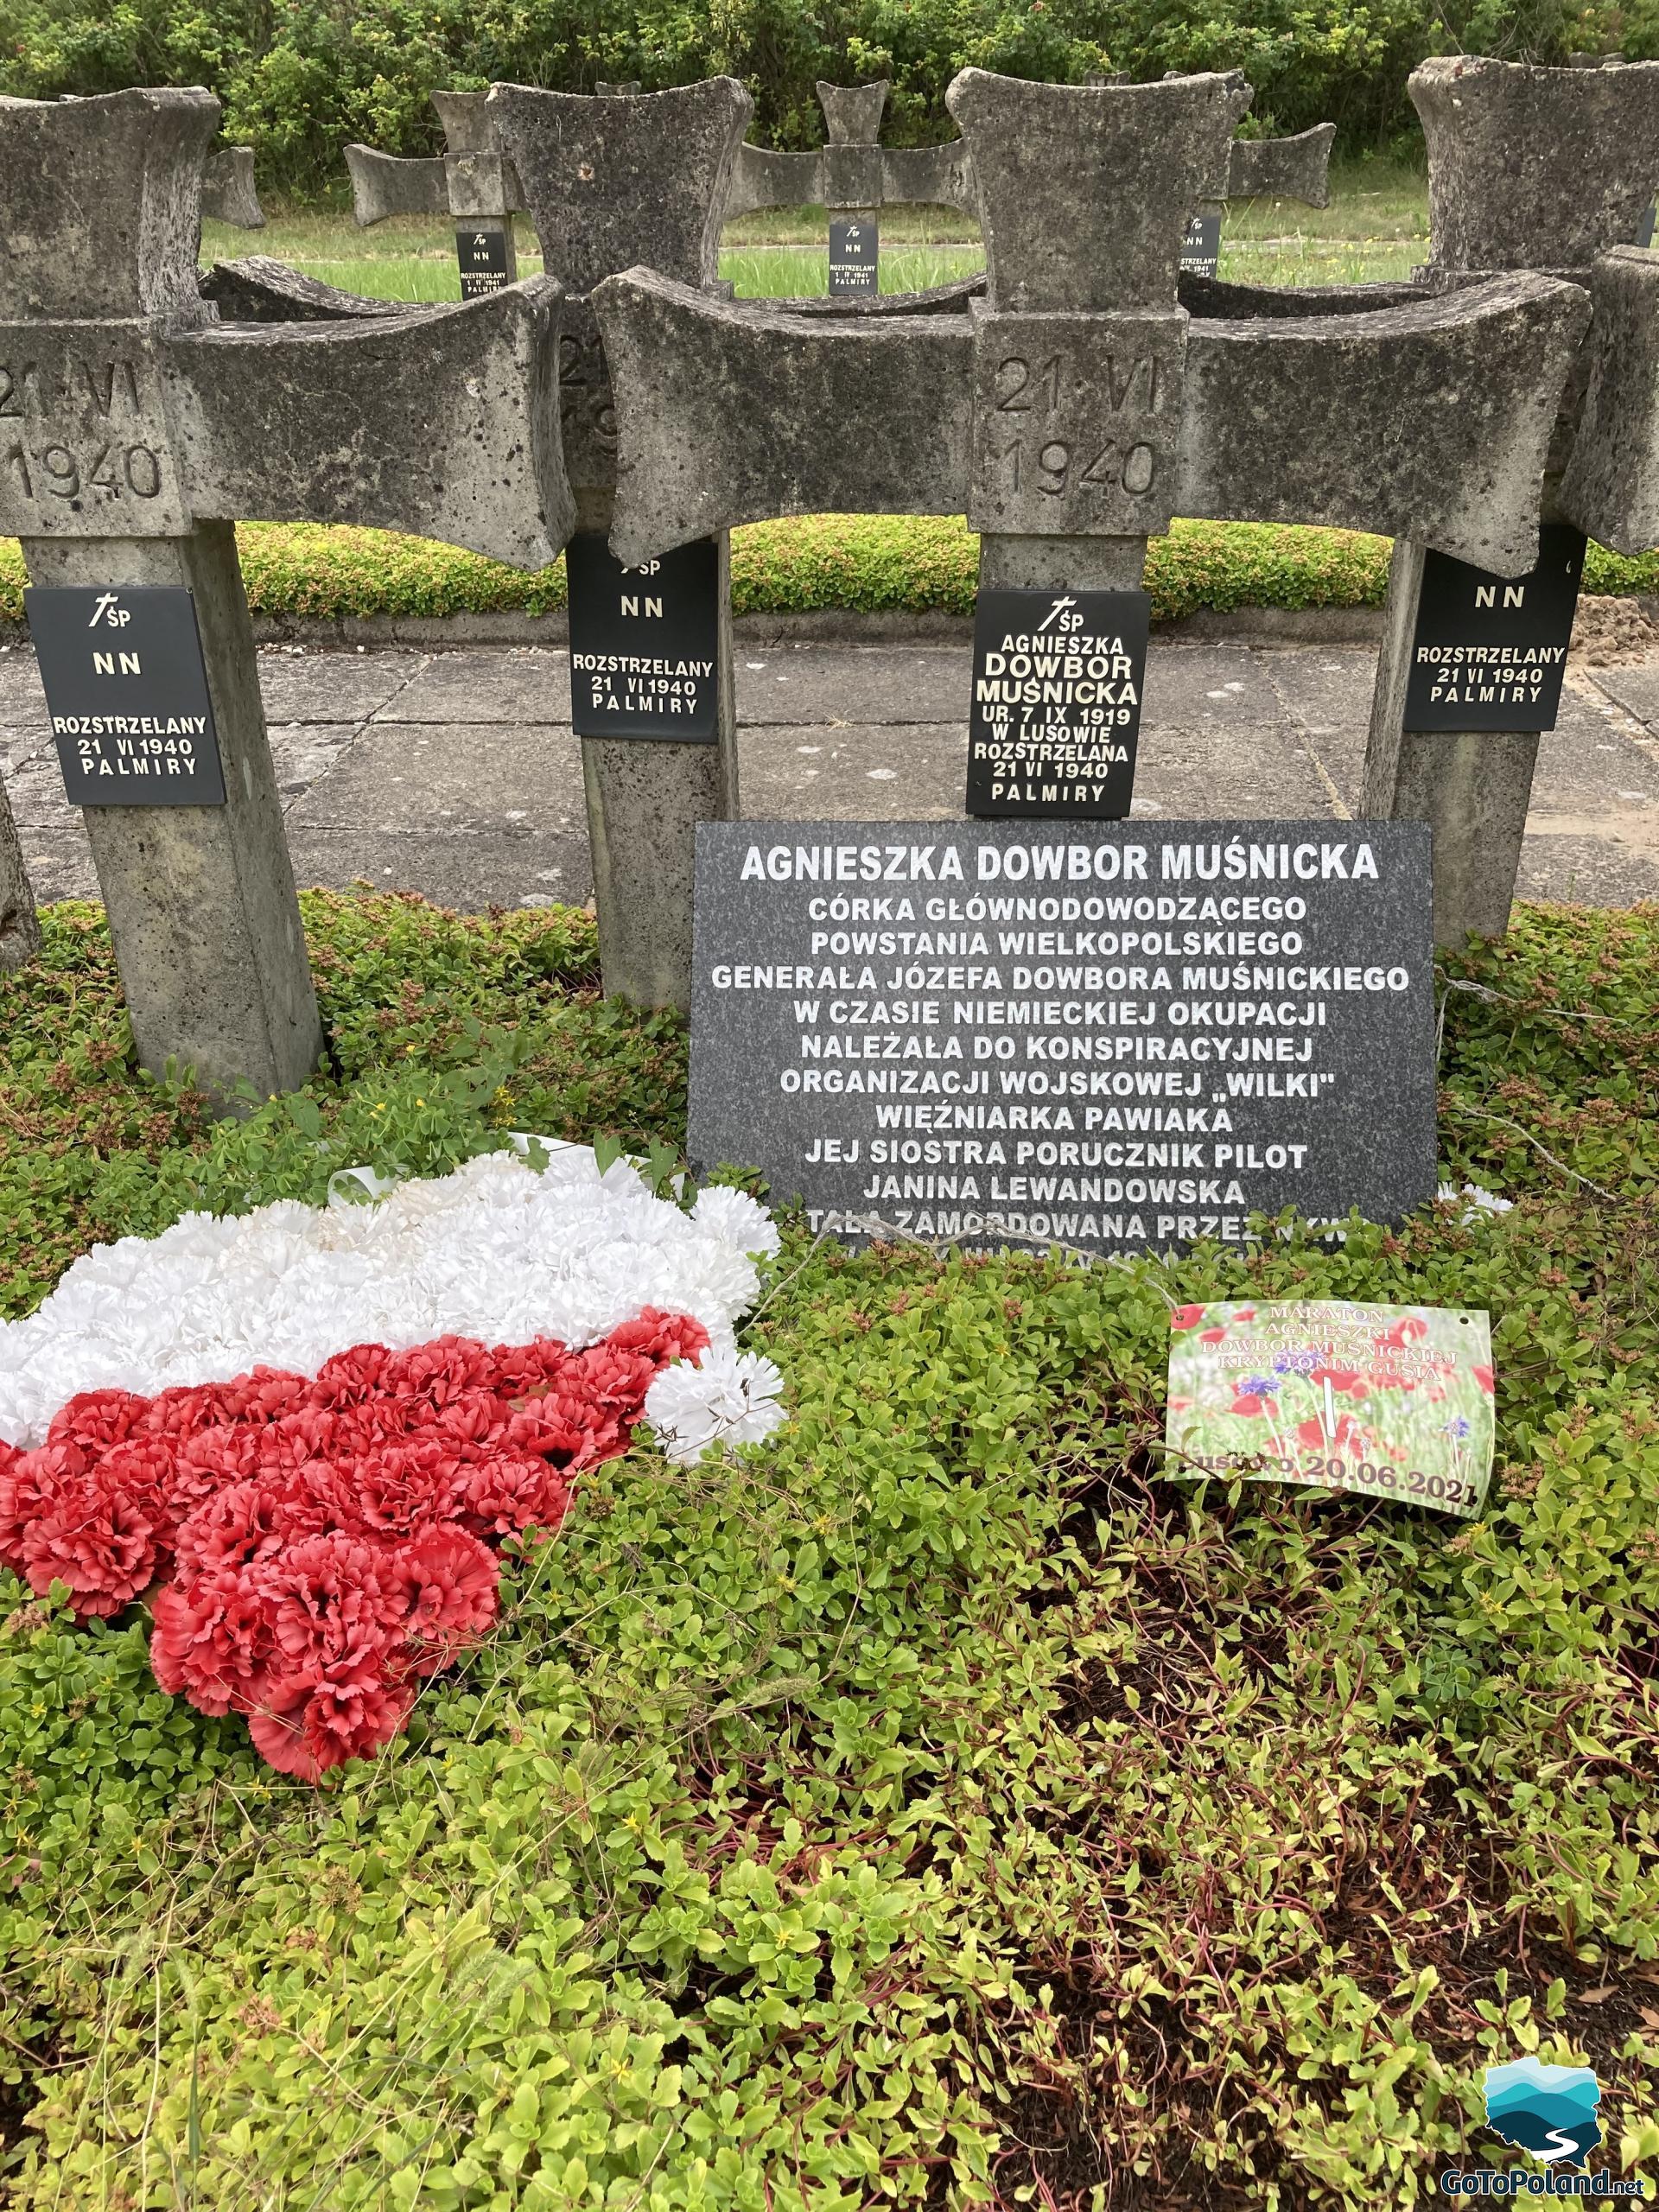 four stone crosses with the inscription unknown, shot, one cross belongs to a shot woman, next to her cross is a white and red heart of flowers